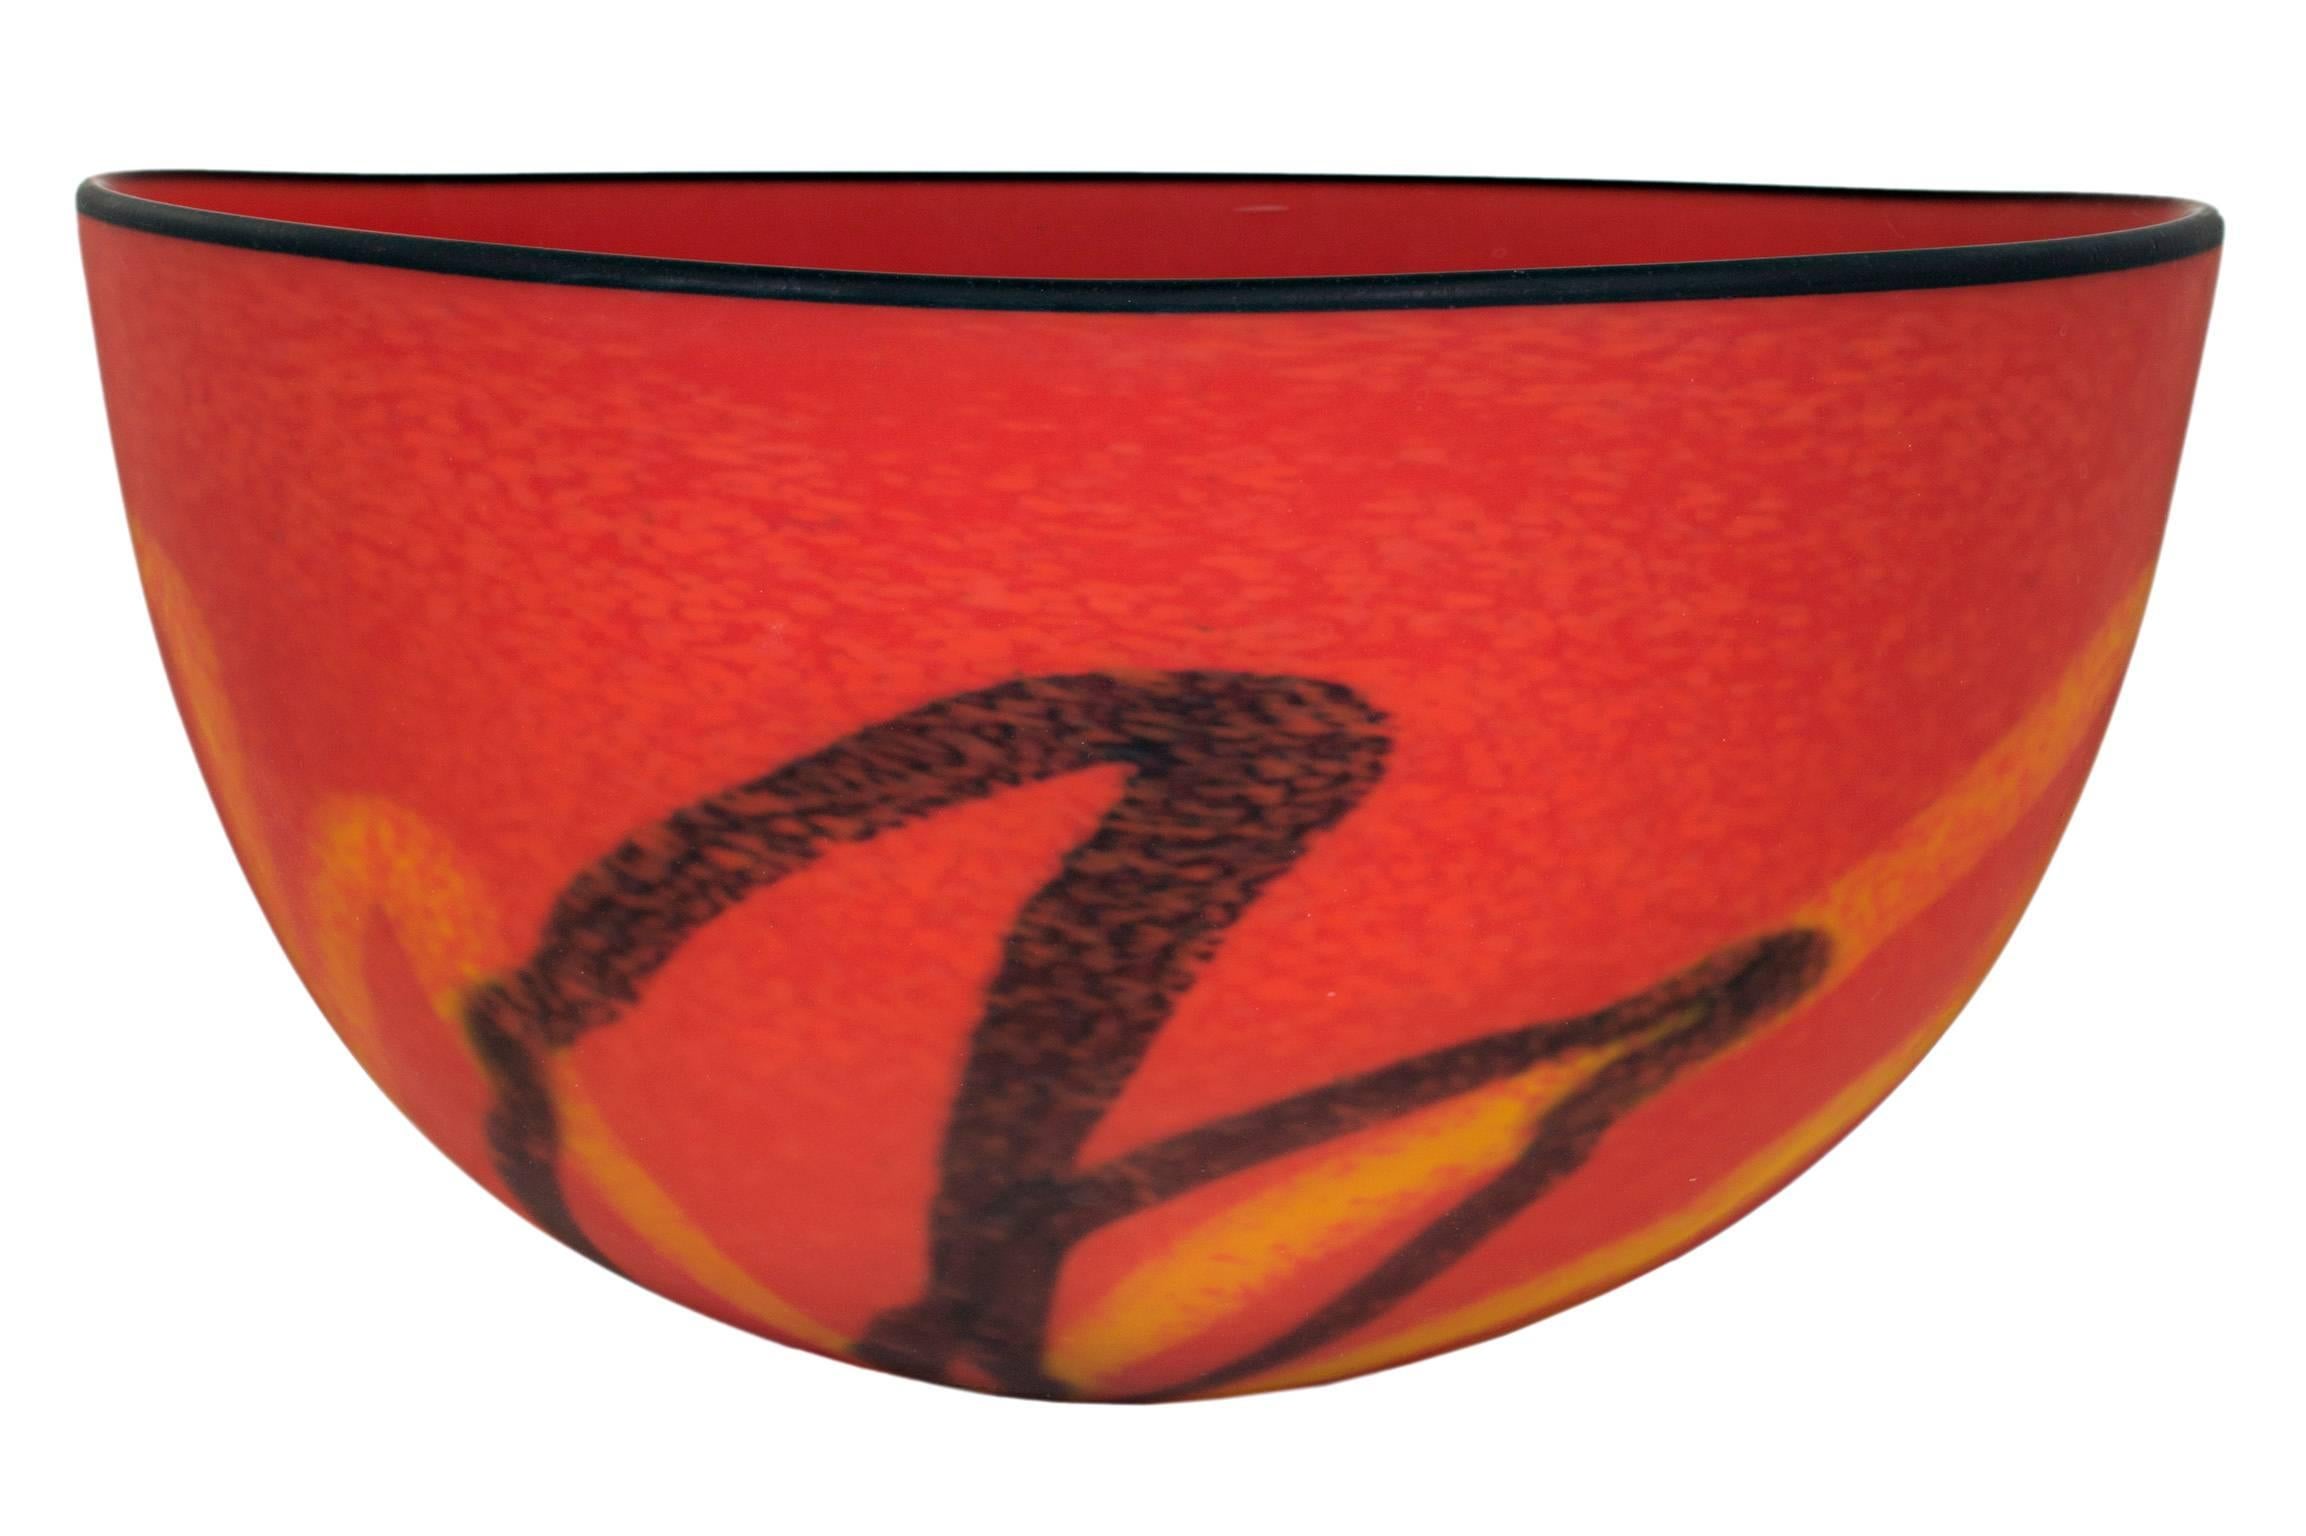 "Red Matte Bowl" is a hand-blown glass bowl by Ioan Nemtoi. It features an abstract pattern of black and yellow lines on a bright red background. The rim of the bowl is black. The artist carved his signature into the base of the piece.

12"